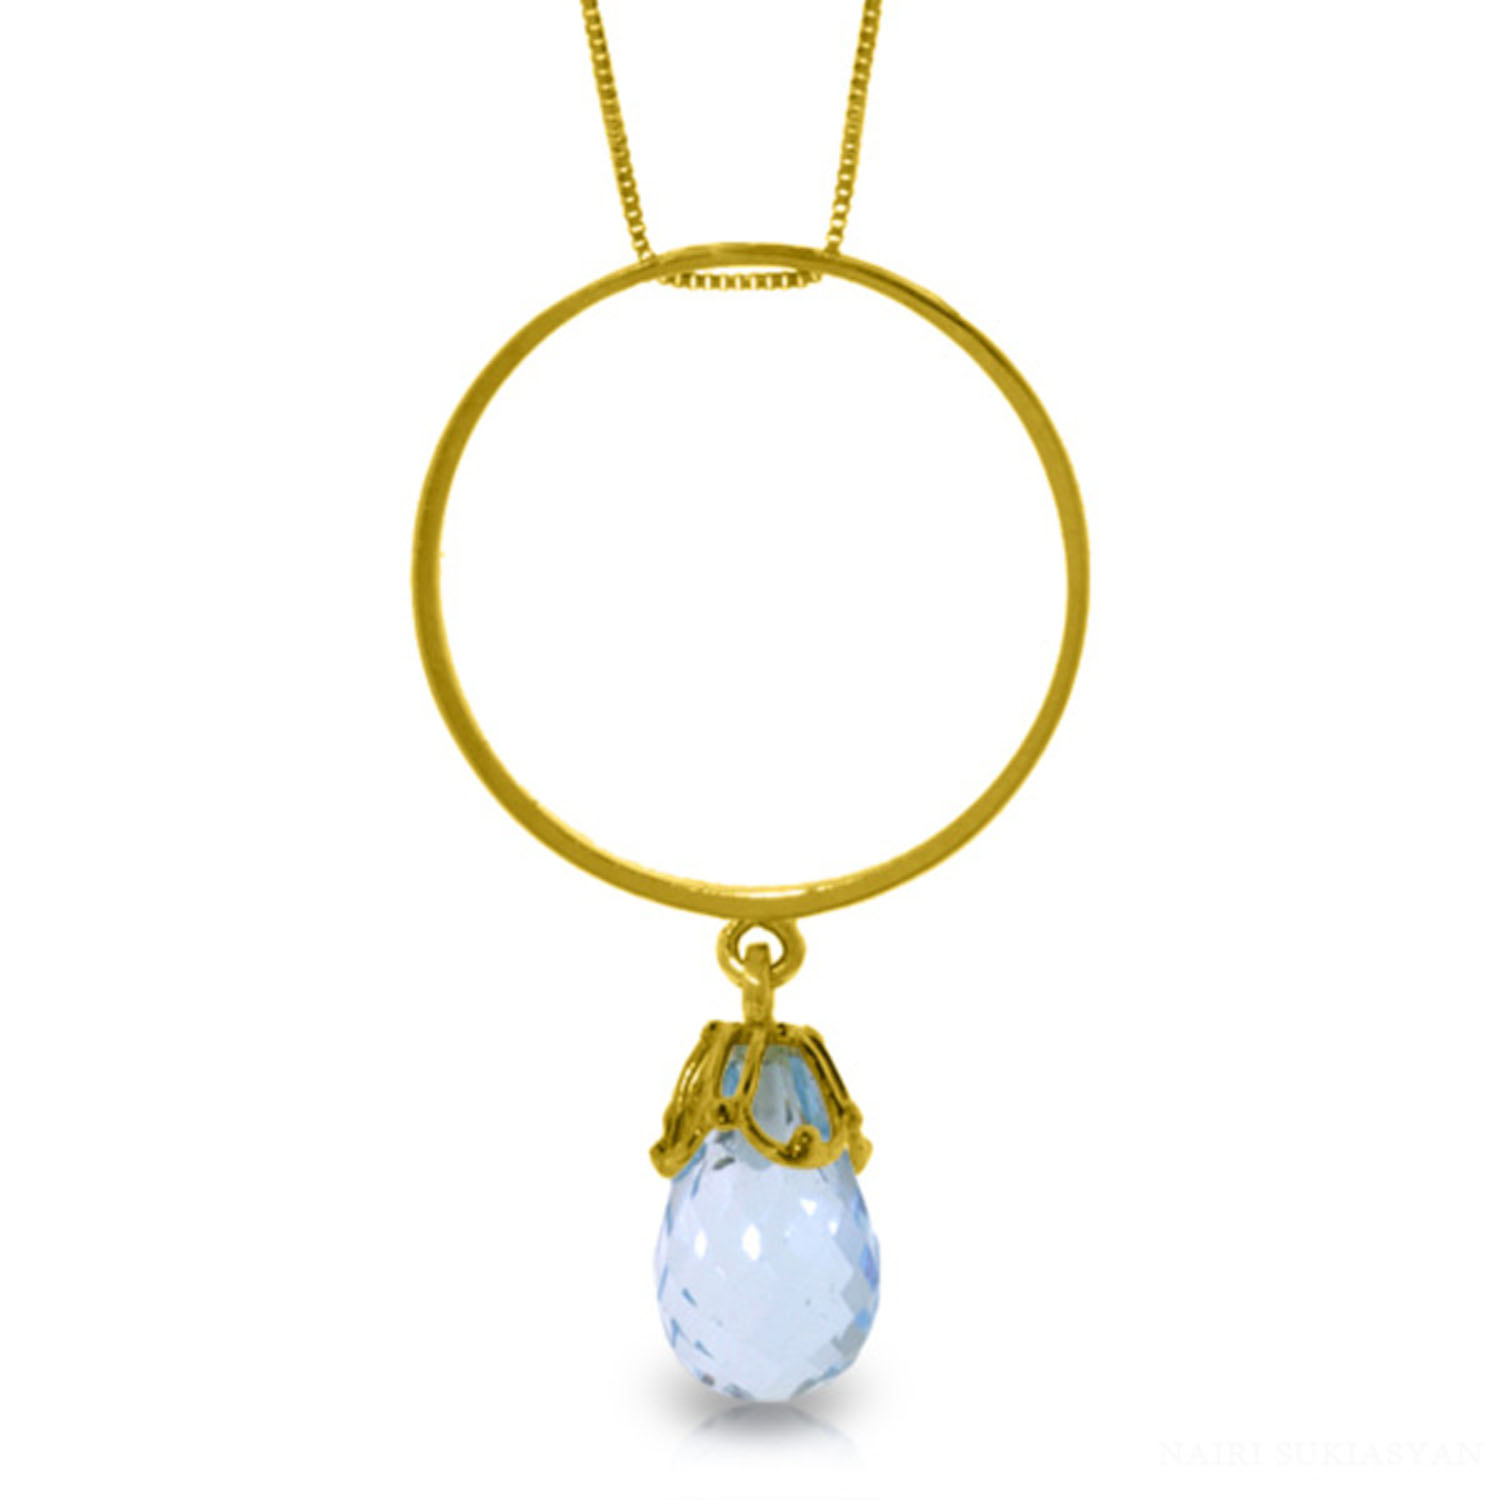 Galaxy Gold 3 Carat 14k 20" Solid Gold Necklace with Natural Blue Topaz Charm Circle Pendant - image 1 of 2